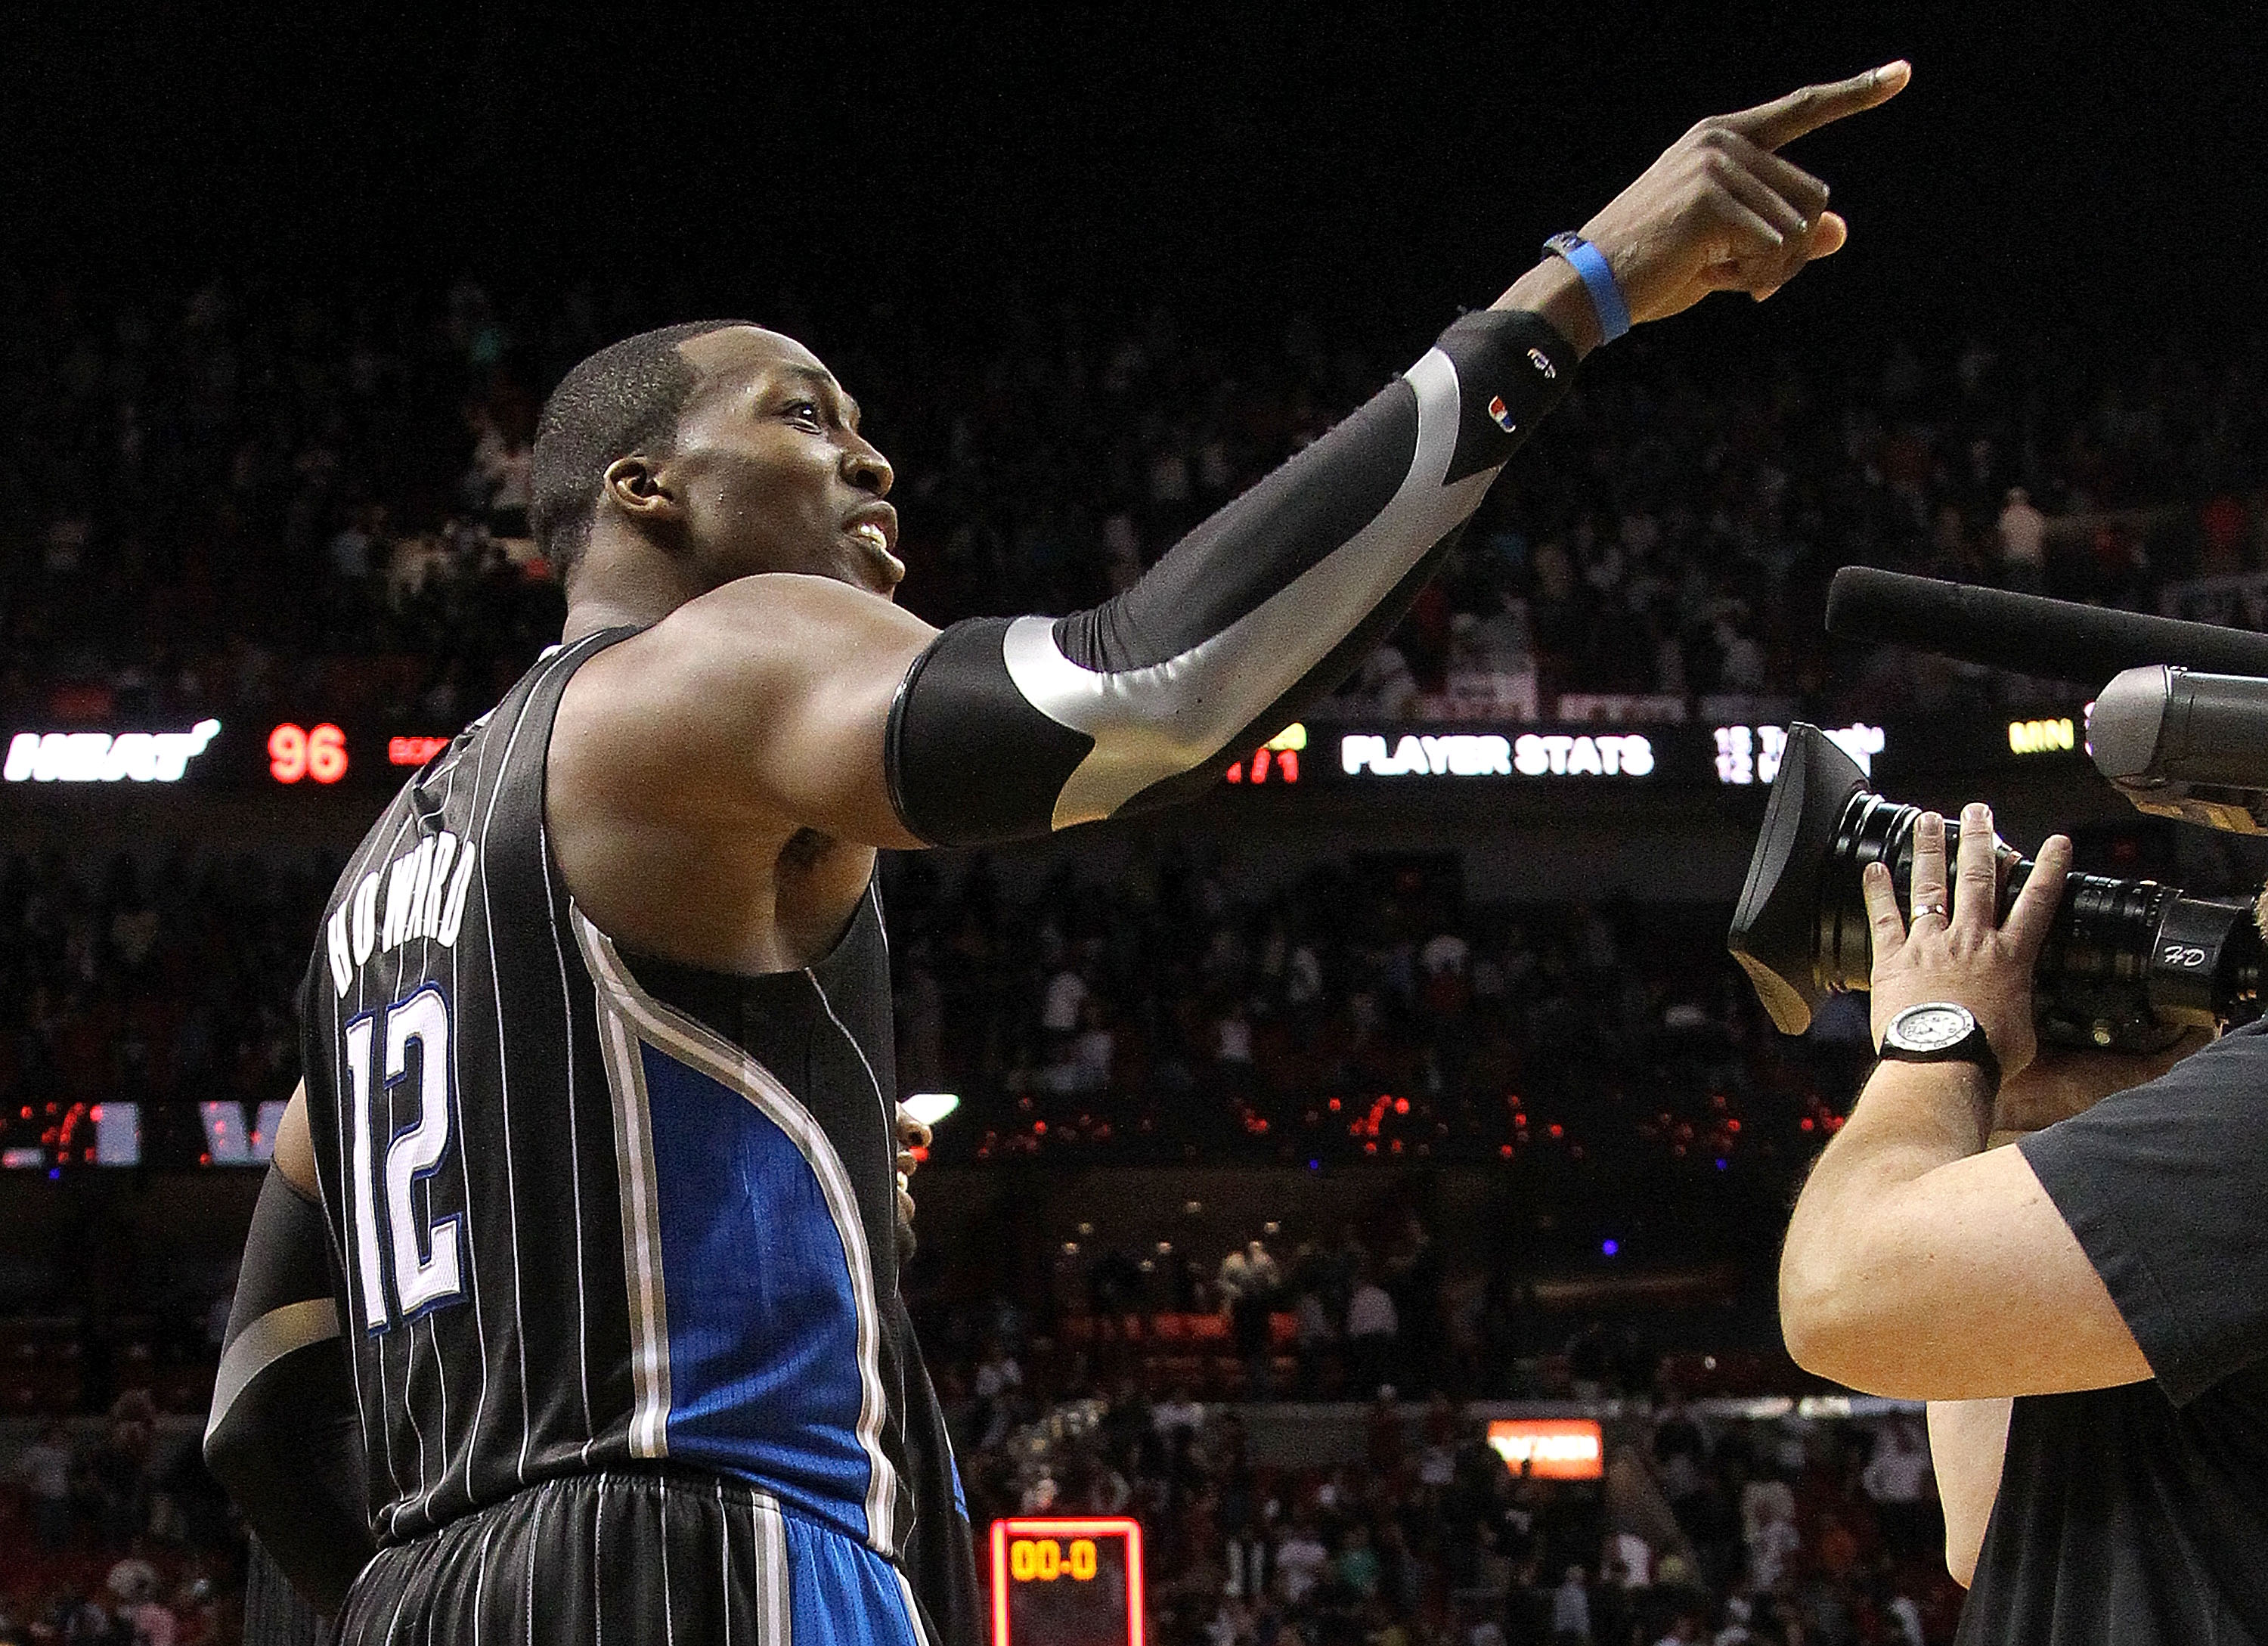 MIAMI, FL - MARCH 03:  Dwight Howard #12 of the Orlando Magic points to a heckler after winning a game against the Miami Heat at American Airlines Arena on March 3, 2011 in Miami, Florida. NOTE TO USER: User expressly acknowledges and agrees that, by down